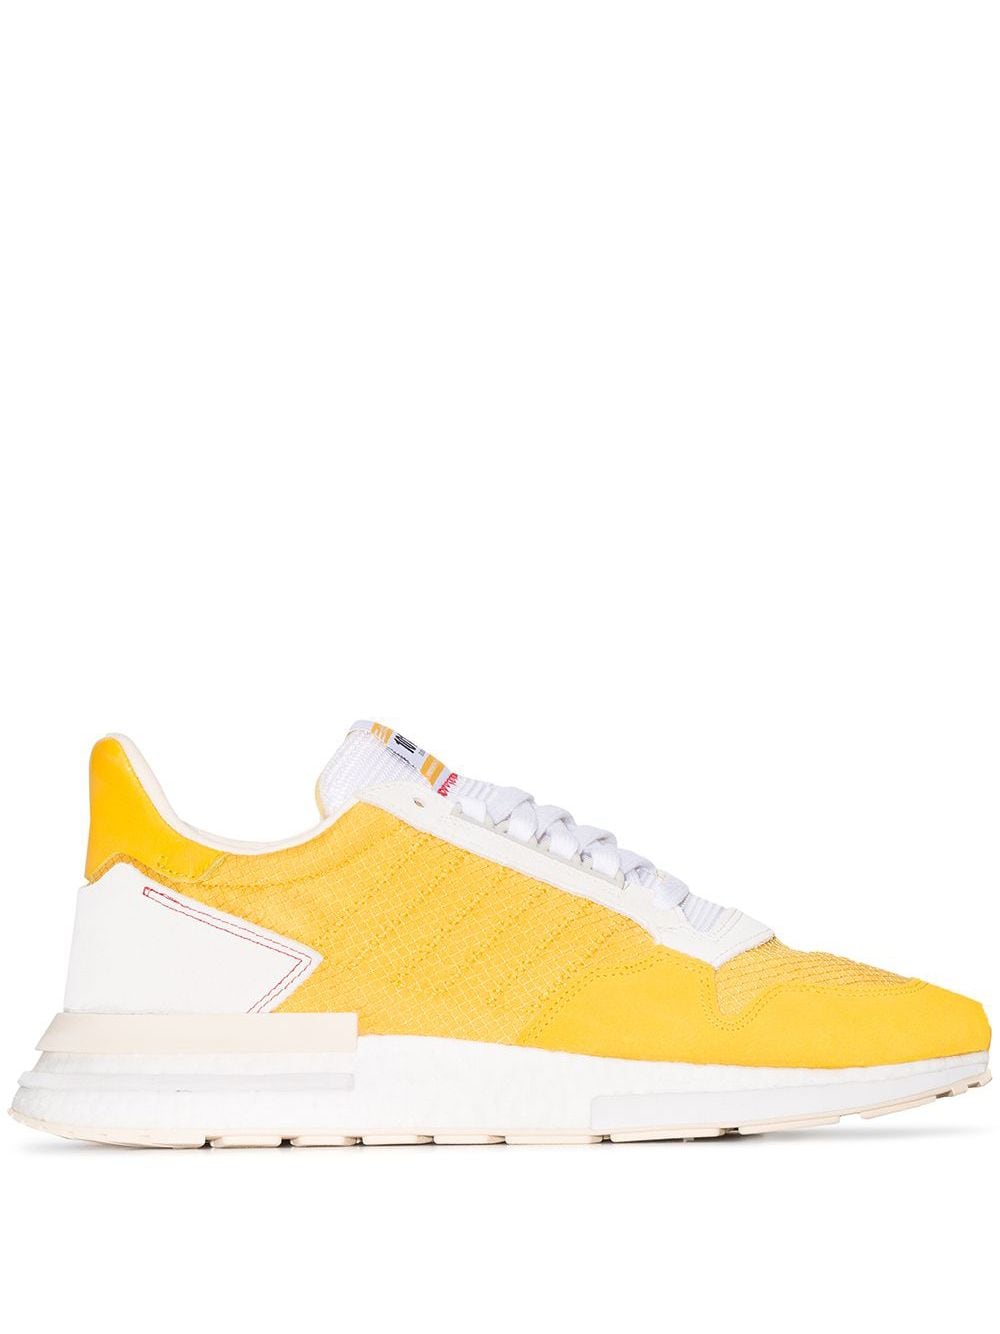 Shop yellow adidas ZX 500 RM sneakers 